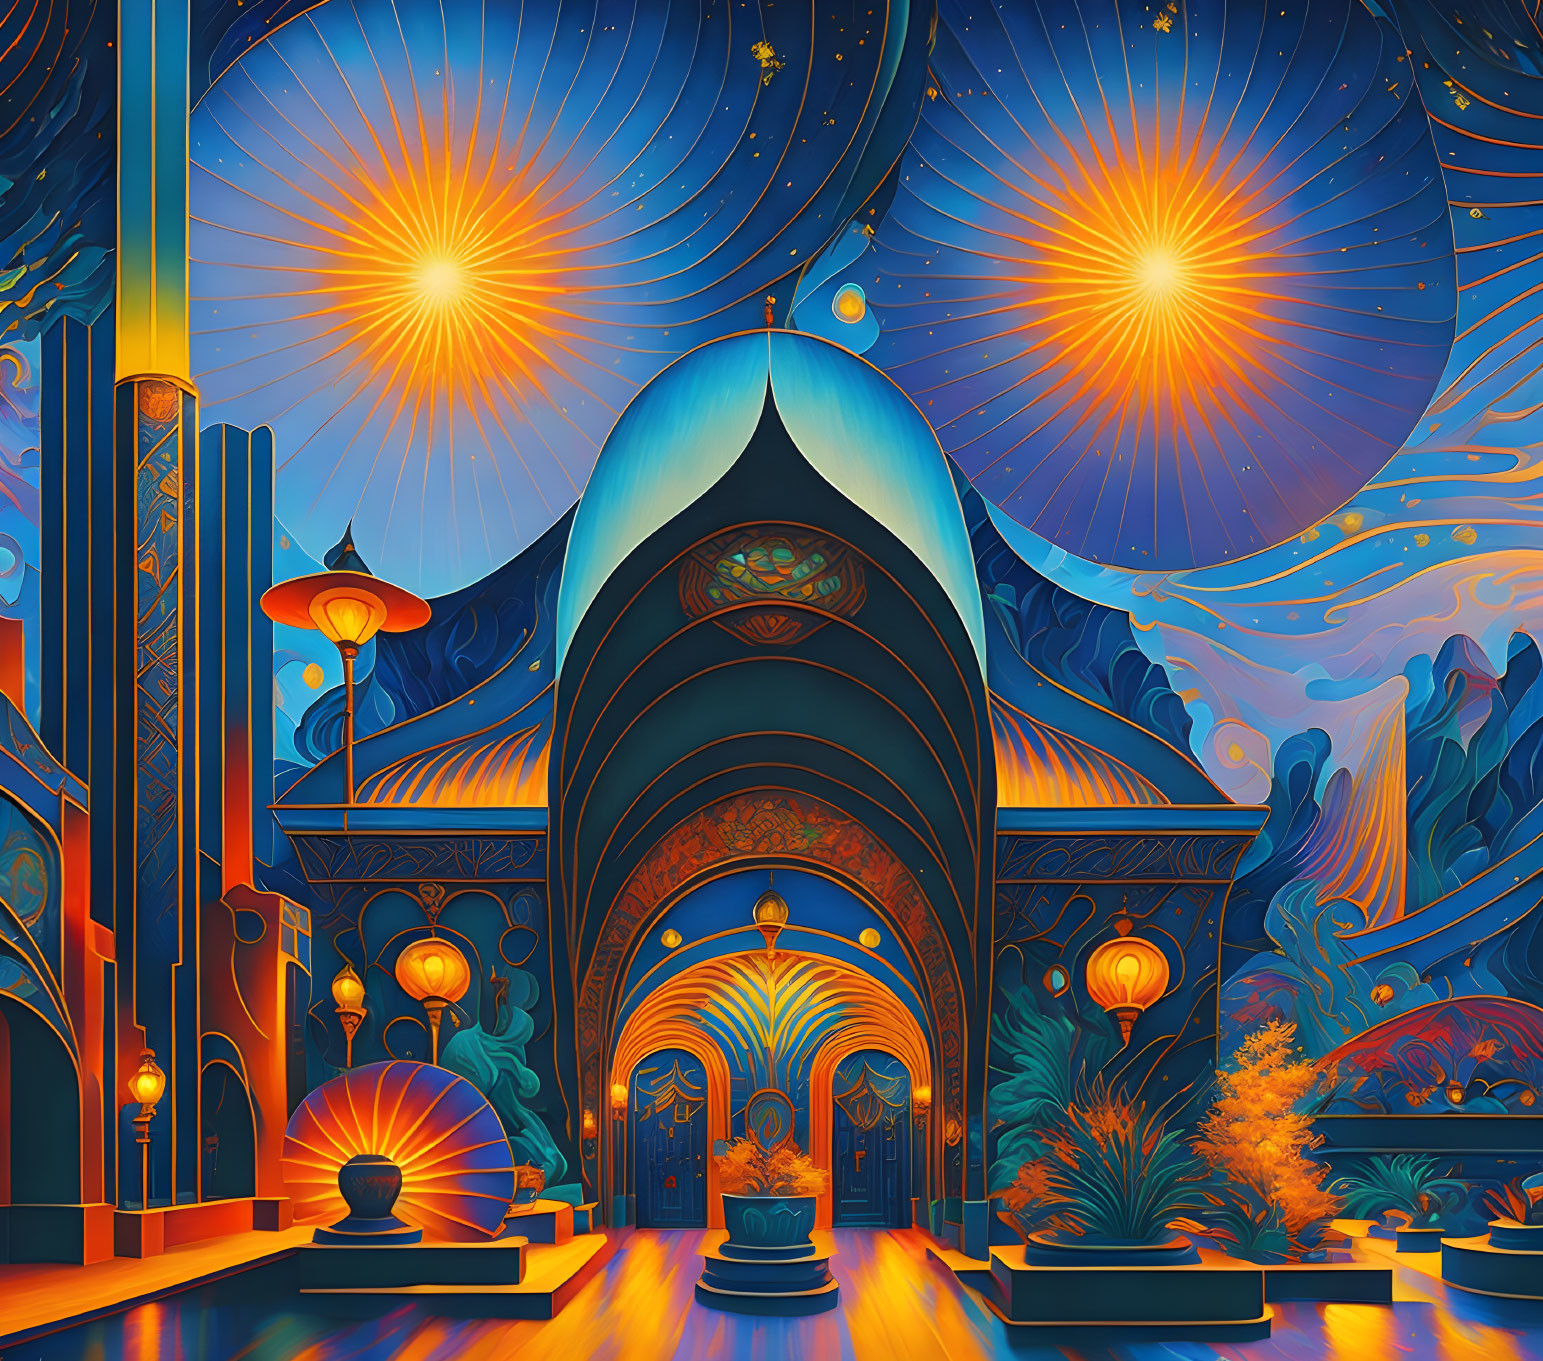 Colorful surreal artwork: fantastical structure, glowing orbs, swirling patterns